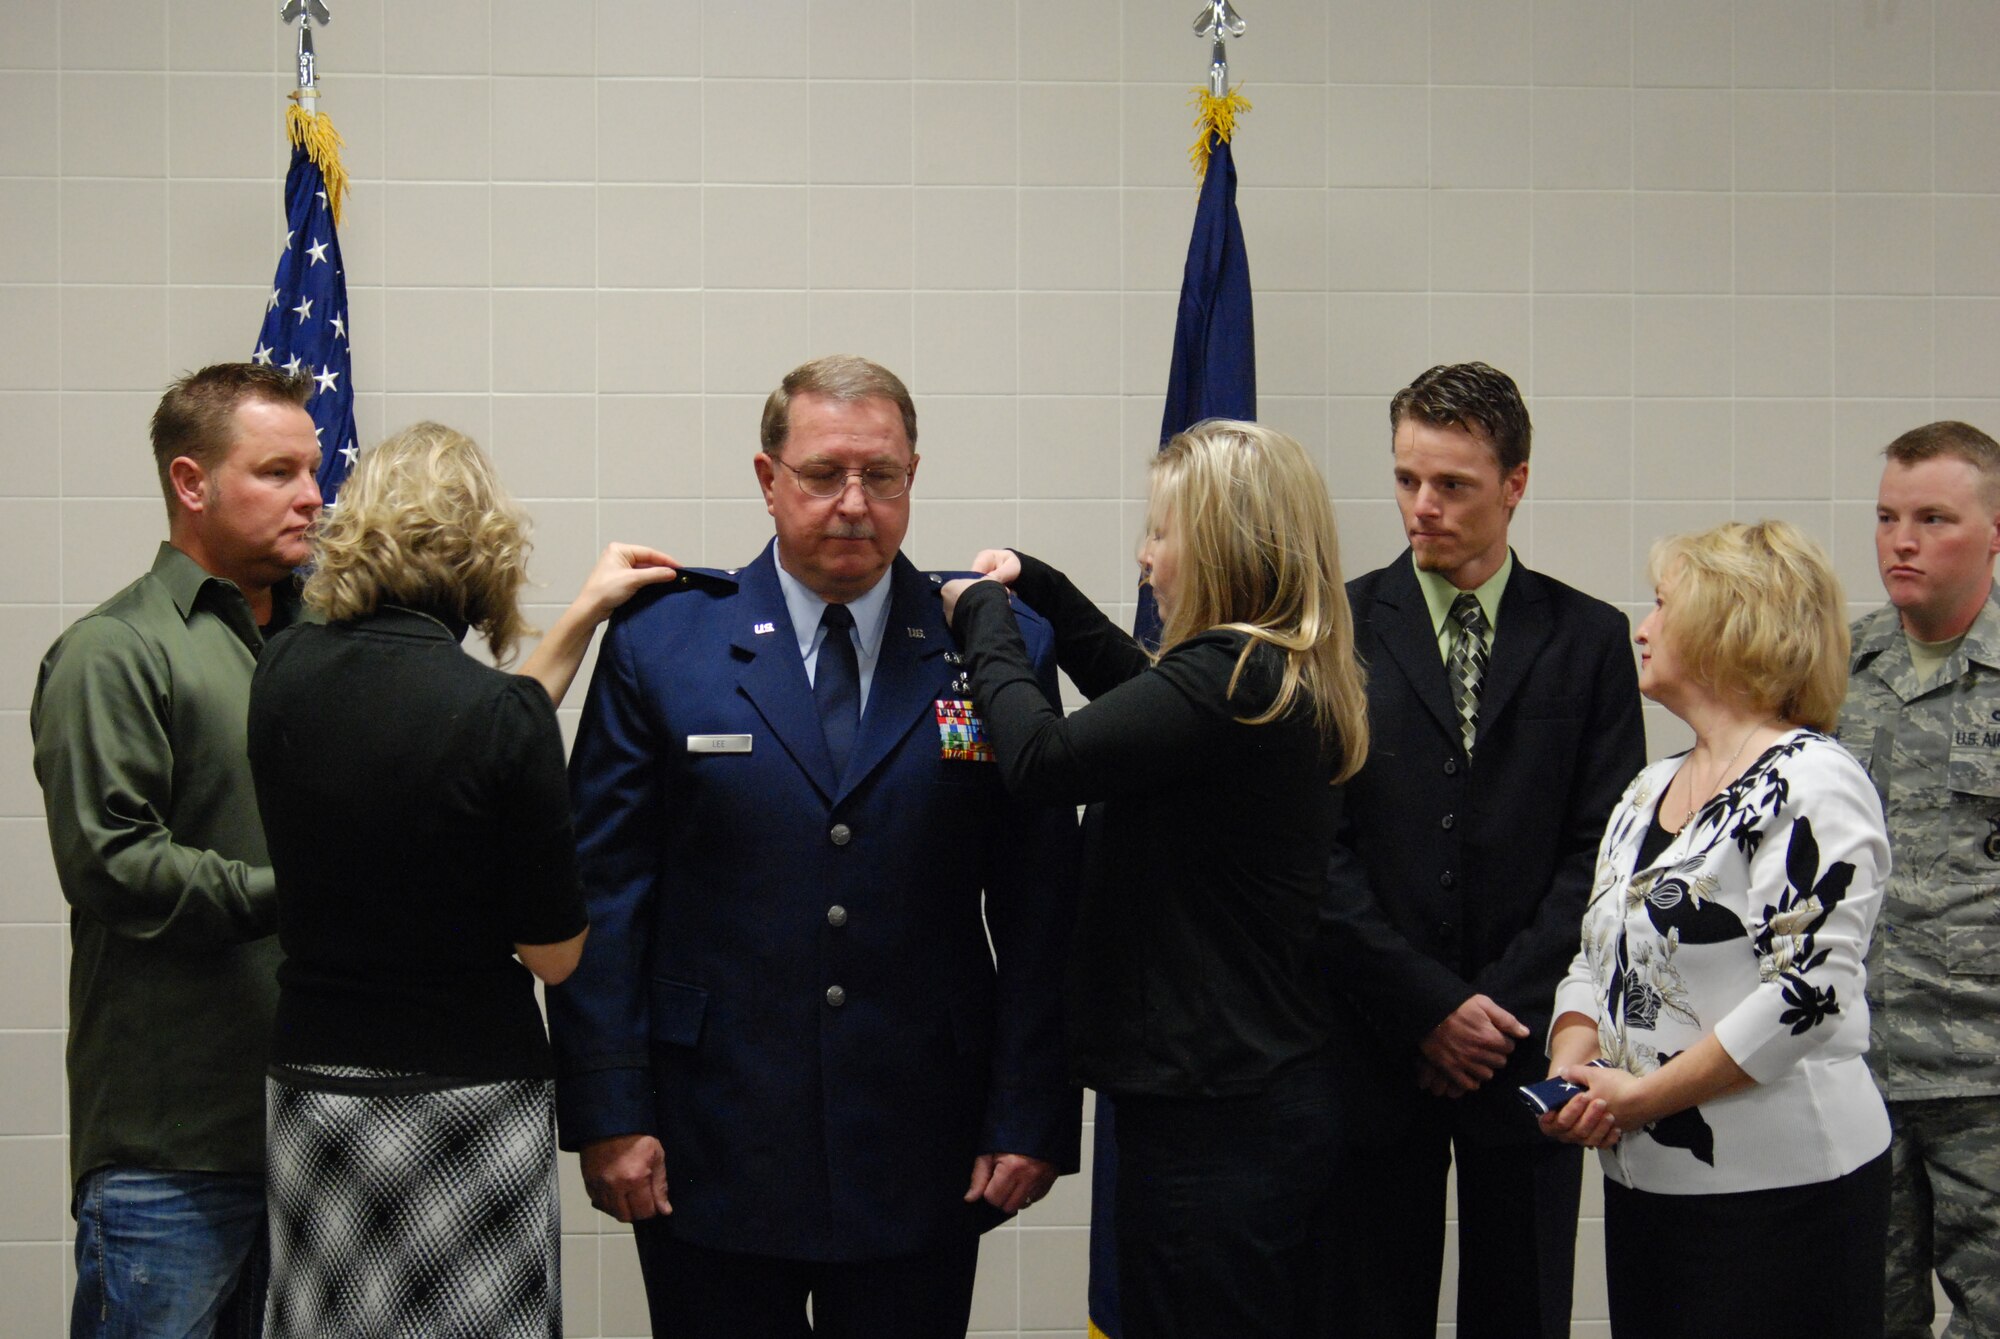 Brig. Gen. Wayne E. Lee, the Utah Assistant Adjutant General for Air, is pinned on by family members Joshua Lee, Rachel Hufstetter, Heather VanWagenen, Jade Lee, Tweet Lee and Tech. Sgt. Chester Lee during a promotion ceremony Jan. 8, 2011, at the Utah Air National Guard Base dining facility. In his comments following the pinning, General Lee mentioned he was humbled by the incredible faith and confidence bestowed upon him. He vowed the Utah ANG will continue to honorably meet its missions in the future. (USAF Photo by Capt. Wayne L. Lee)(Released).